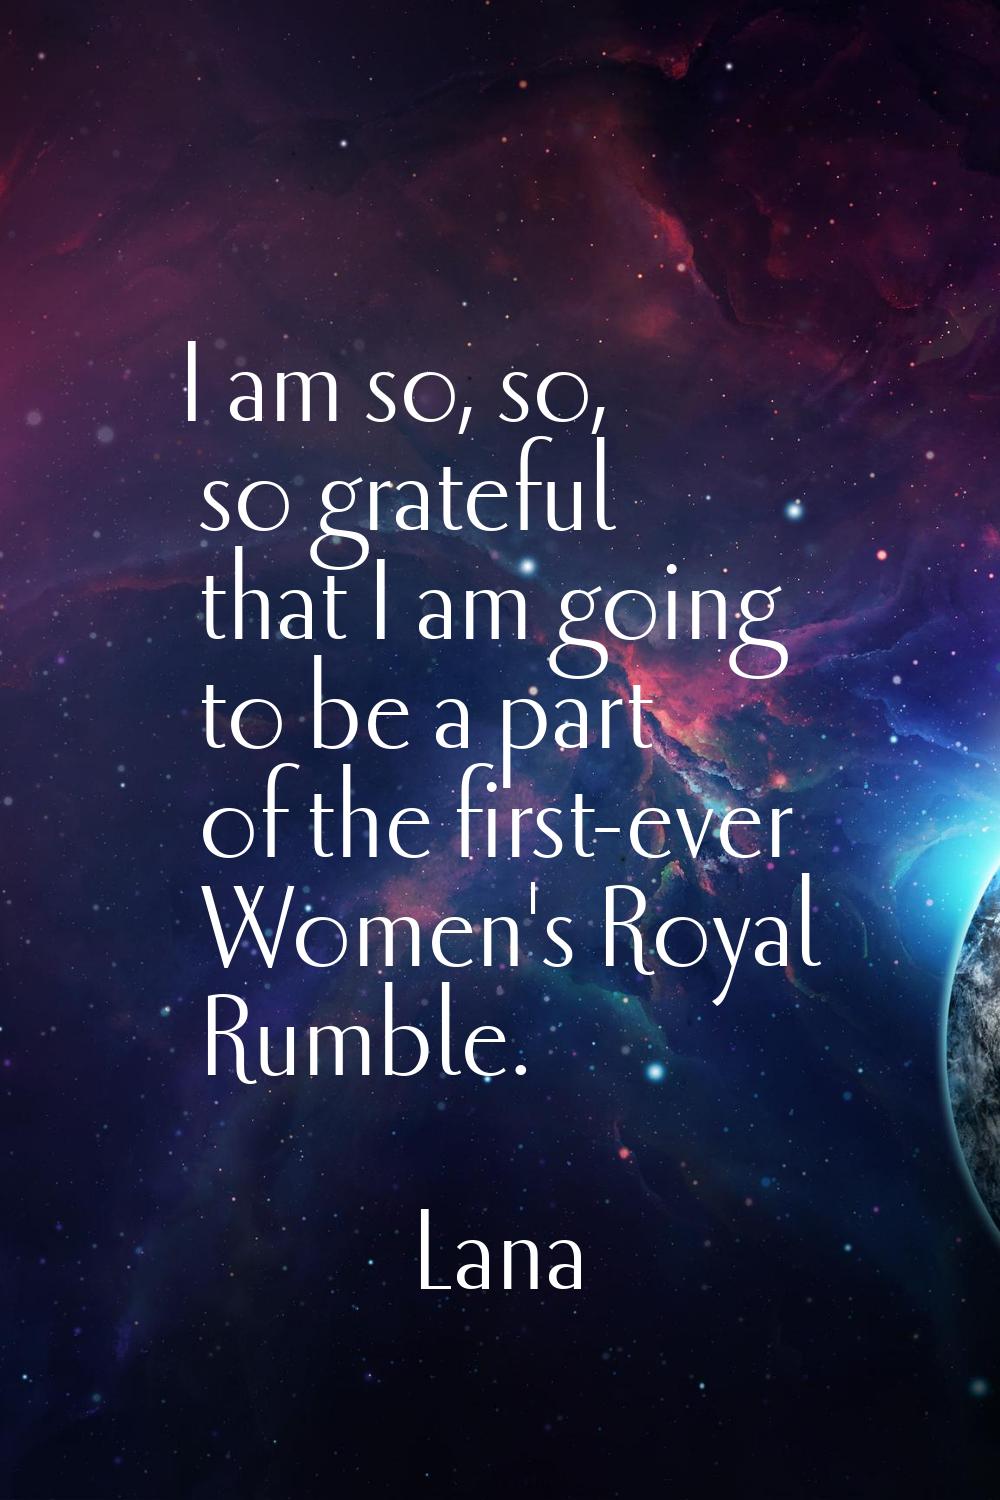 I am so, so, so grateful that I am going to be a part of the first-ever Women's Royal Rumble.